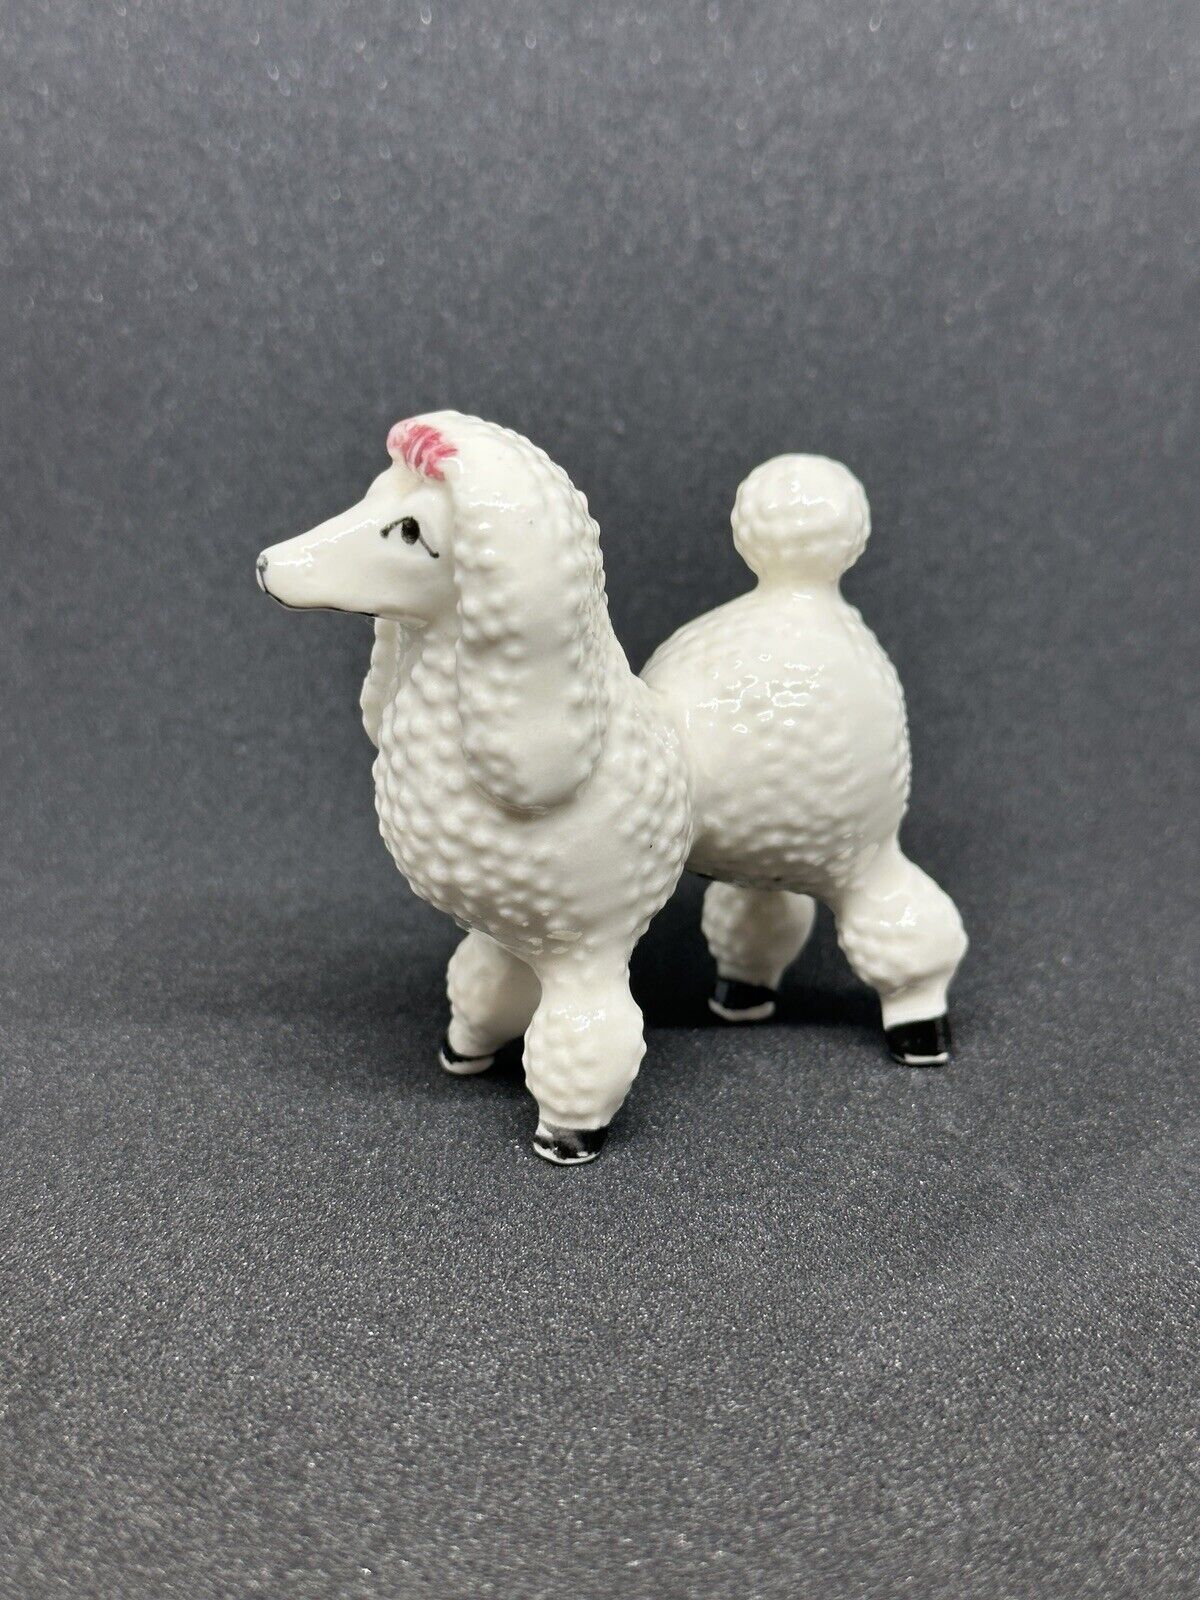 Vintage Small White Poodle with Red Bow Figurine Made in Japan